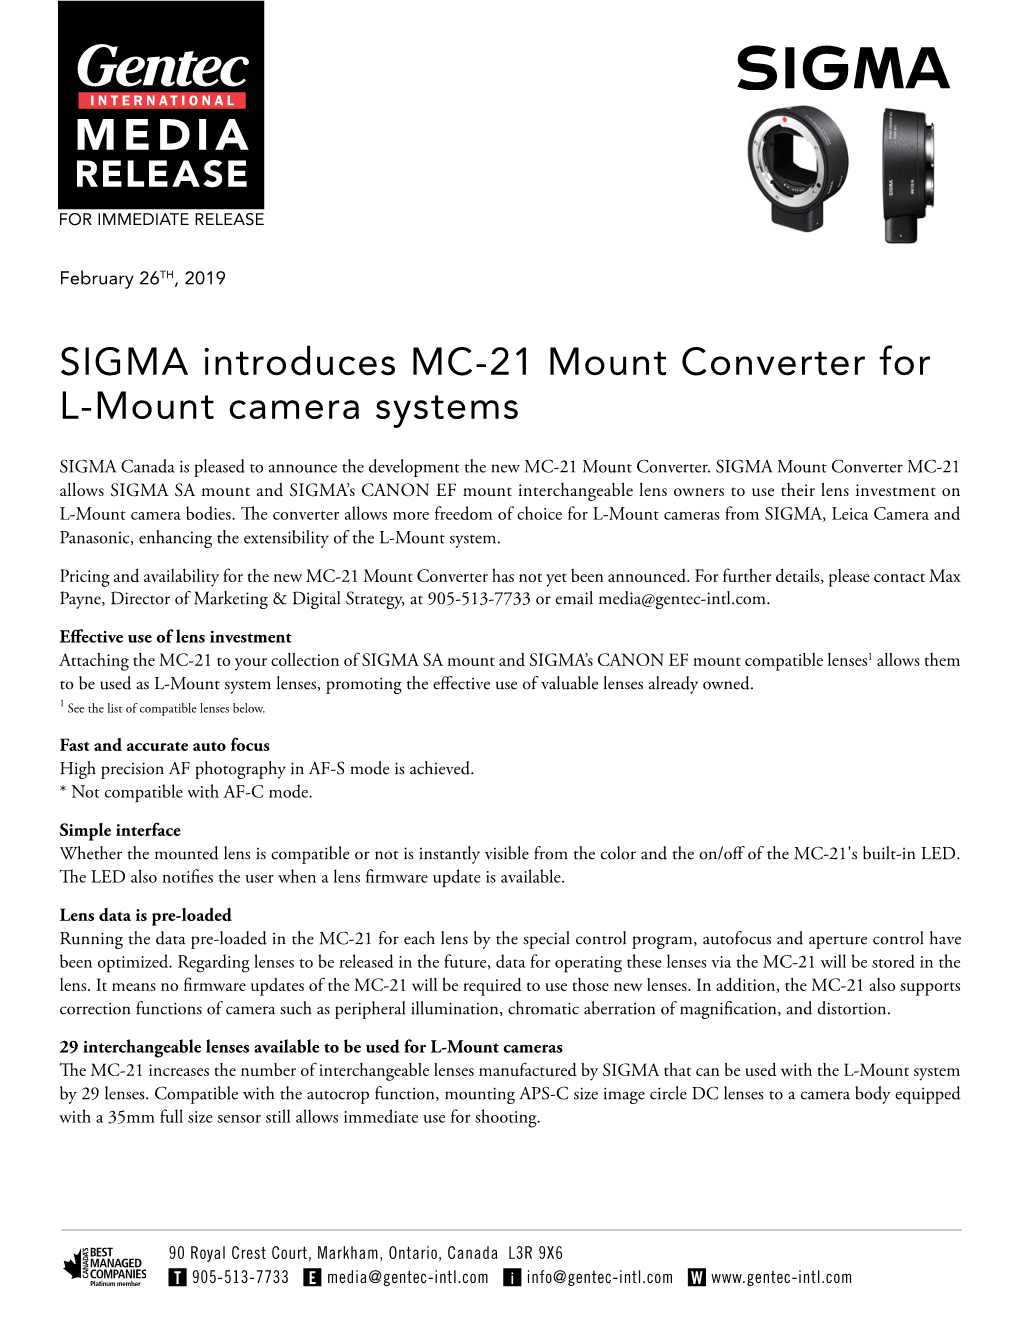 SIGMA Introduces MC-21 Mount Converter for L-Mount Camera Systems